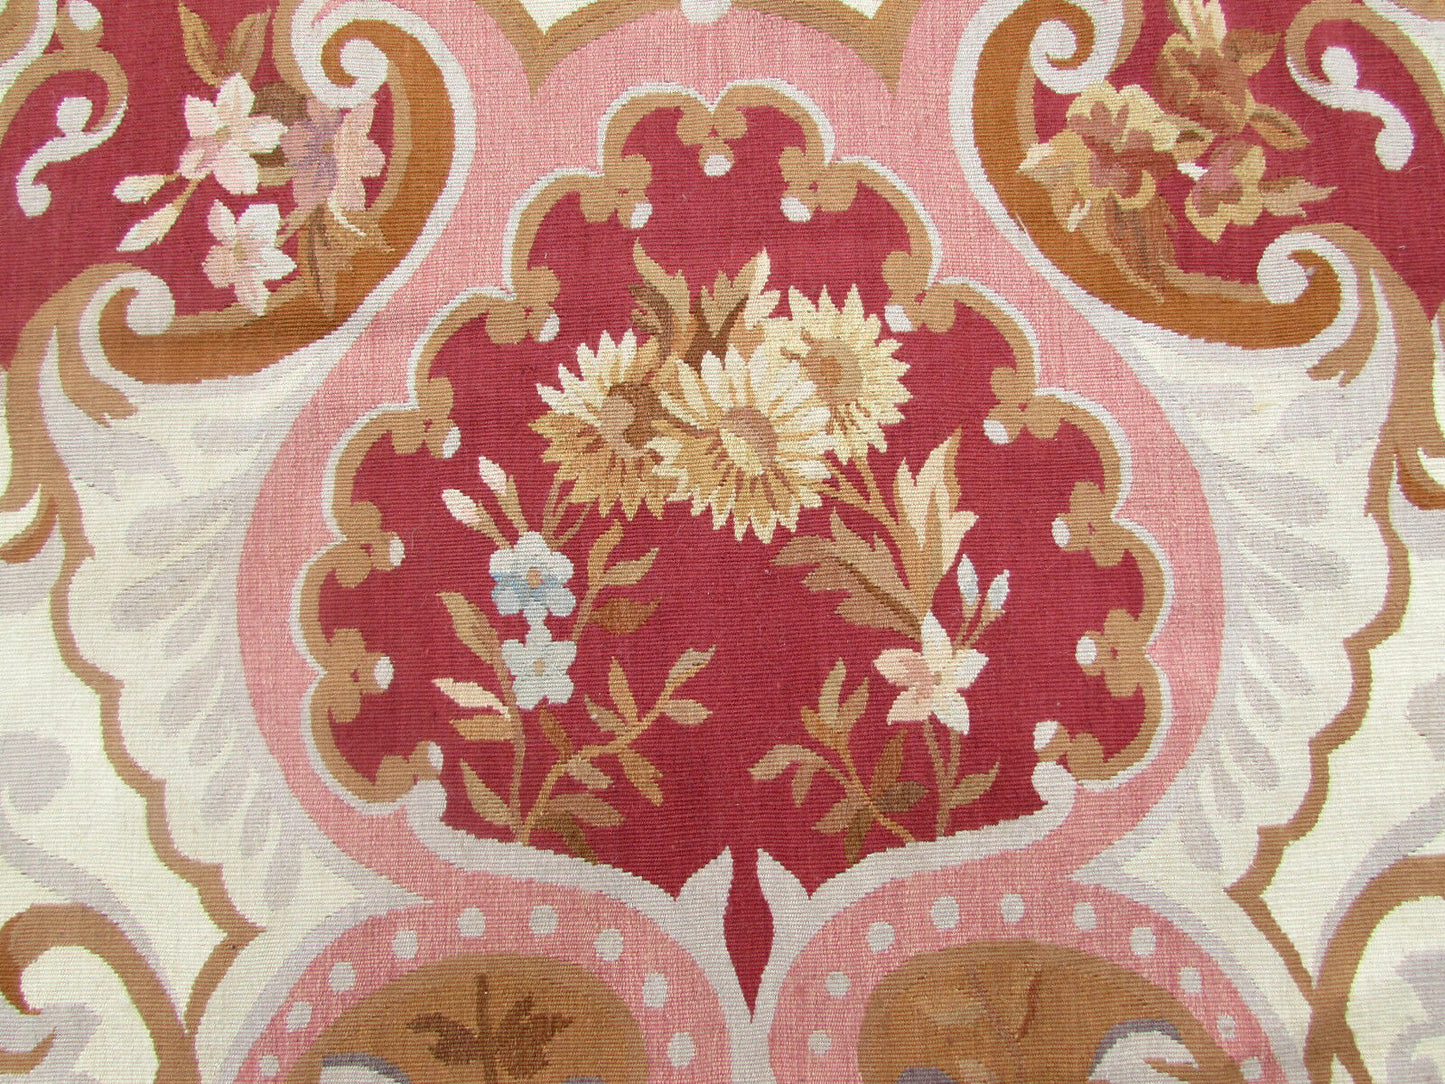 The warm and inviting color combination of red, beige, and olive brown in the Aubusson Rug